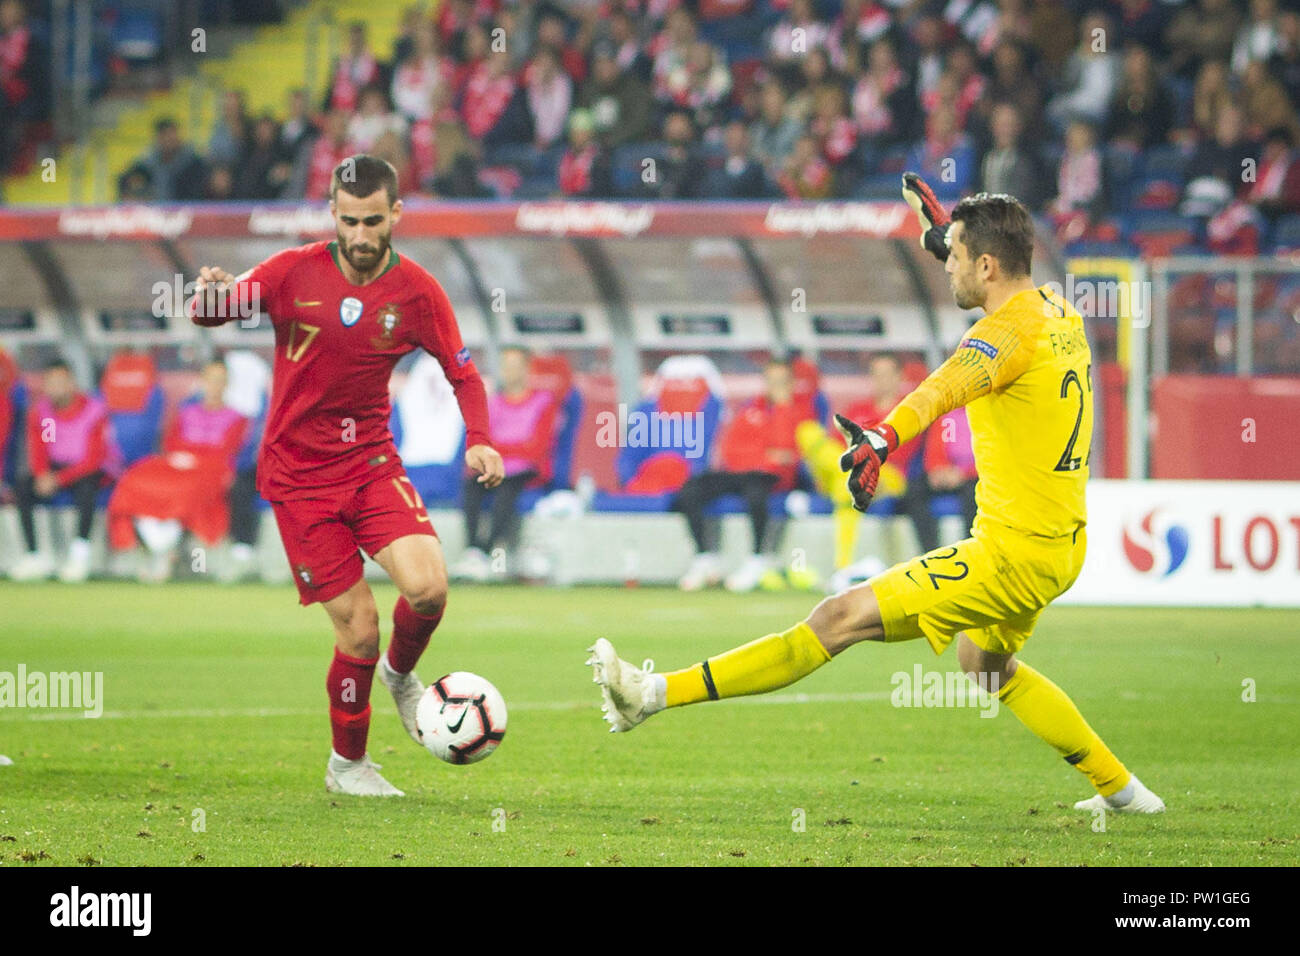 Katowice, Poland. 11th Oct, 2018. Portugal's player Rafa Silva scores the second goal during the match between Poland and Portugal for the UEFA Nations League, at Slaski Stadium, in ChorzÃ³w, Poland.Final Score: Poland 2-3 Portugal Credit: Diogo Baptista/SOPA Images/ZUMA Wire/Alamy Live News Stock Photo